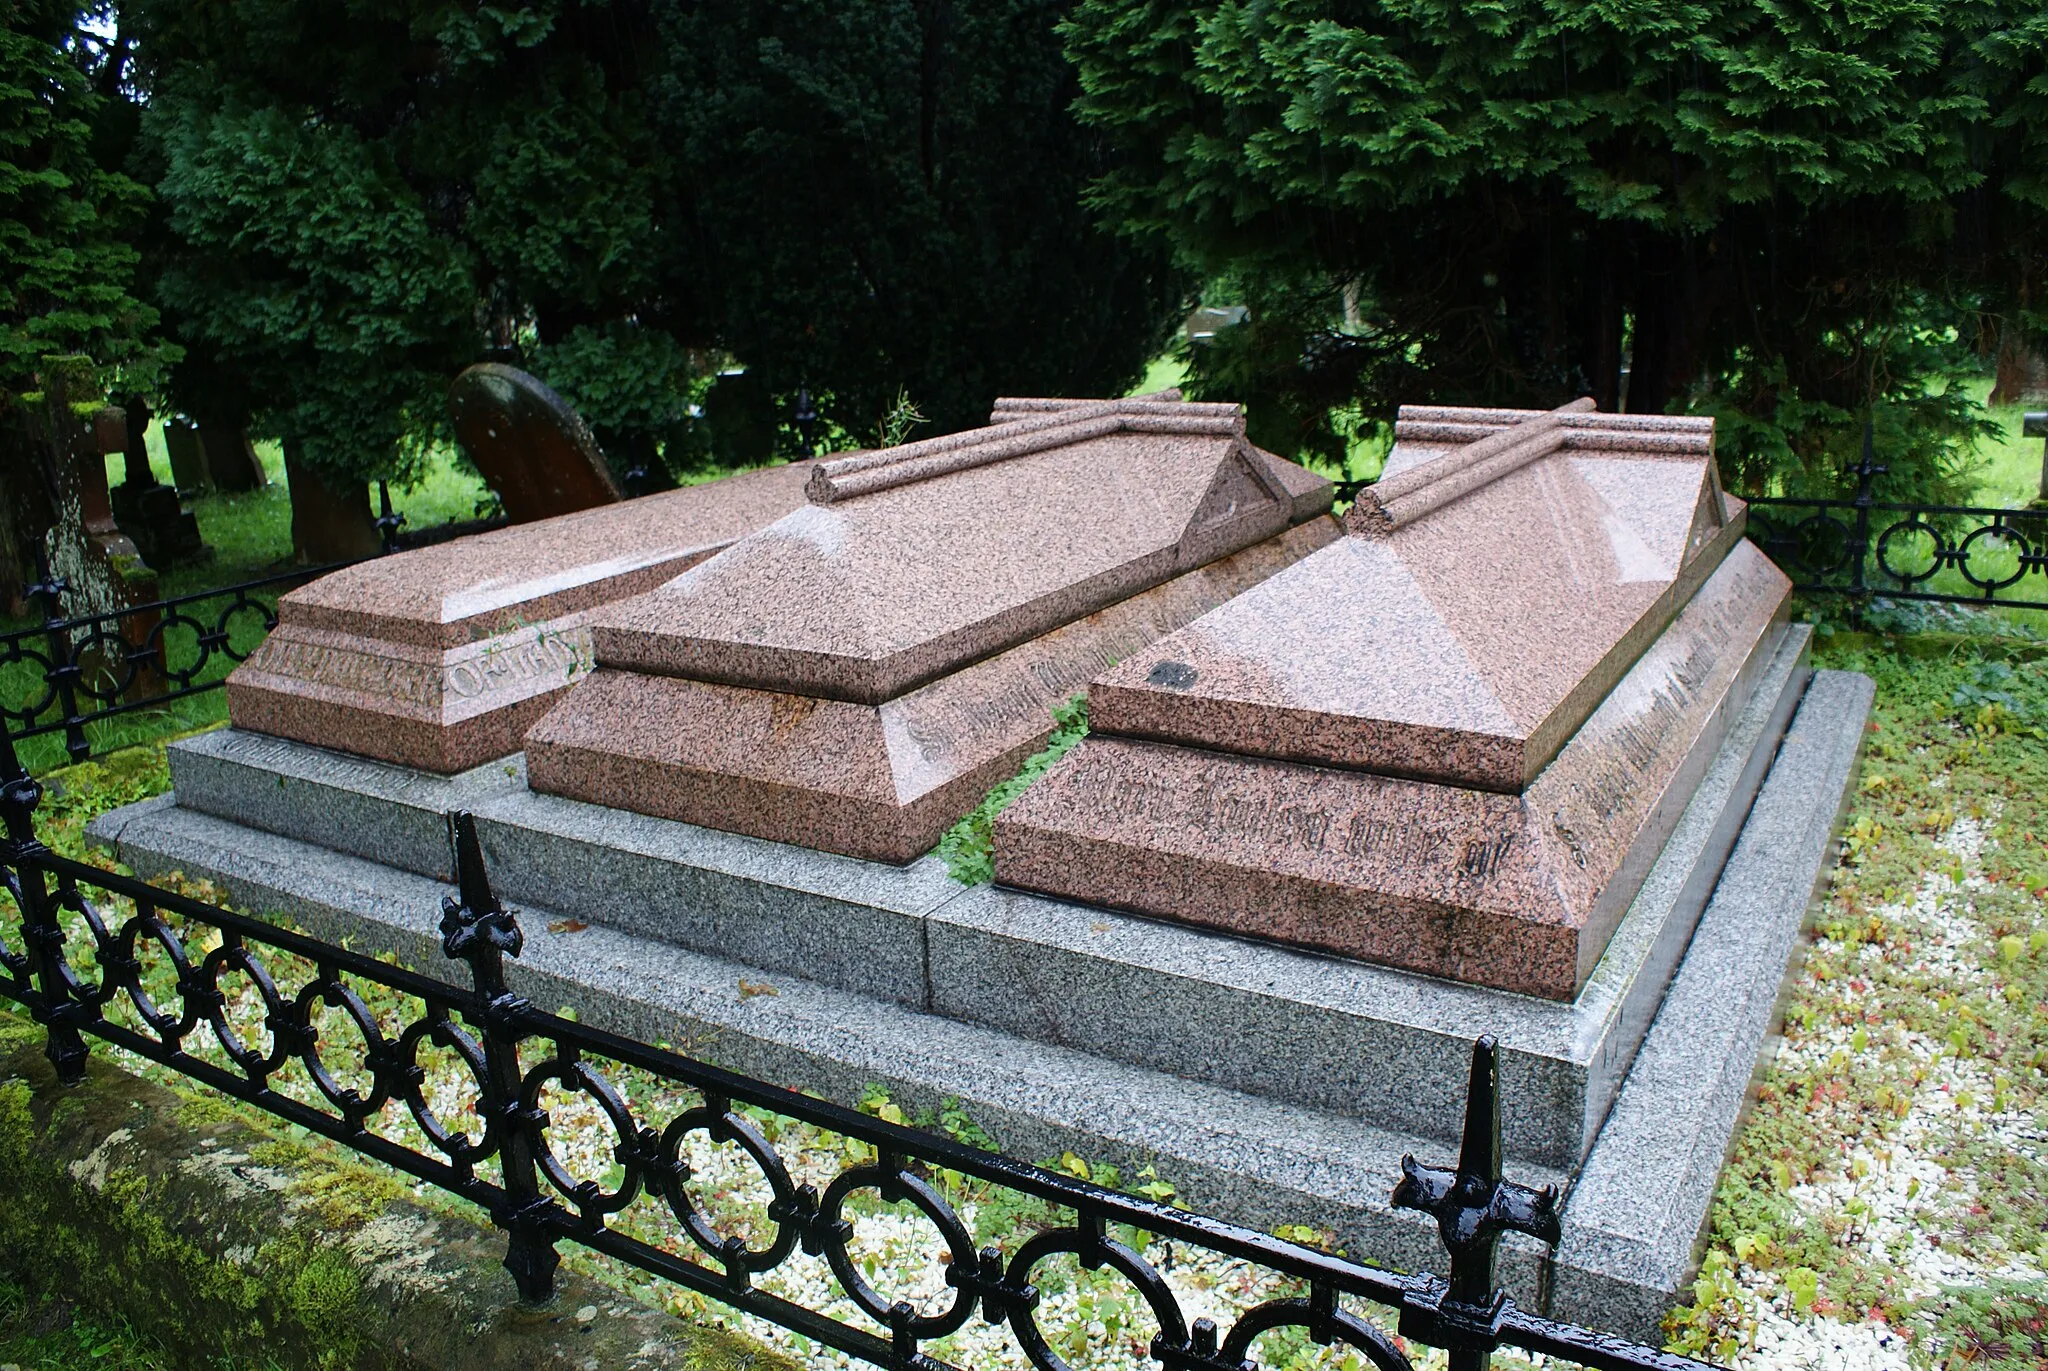 Photo showing: The grave of Sir Joseph Whitworth Bart. in the grounds of St Helen's parish church, Darley Dale, Derby (Whitworth's grave is the central tomb)